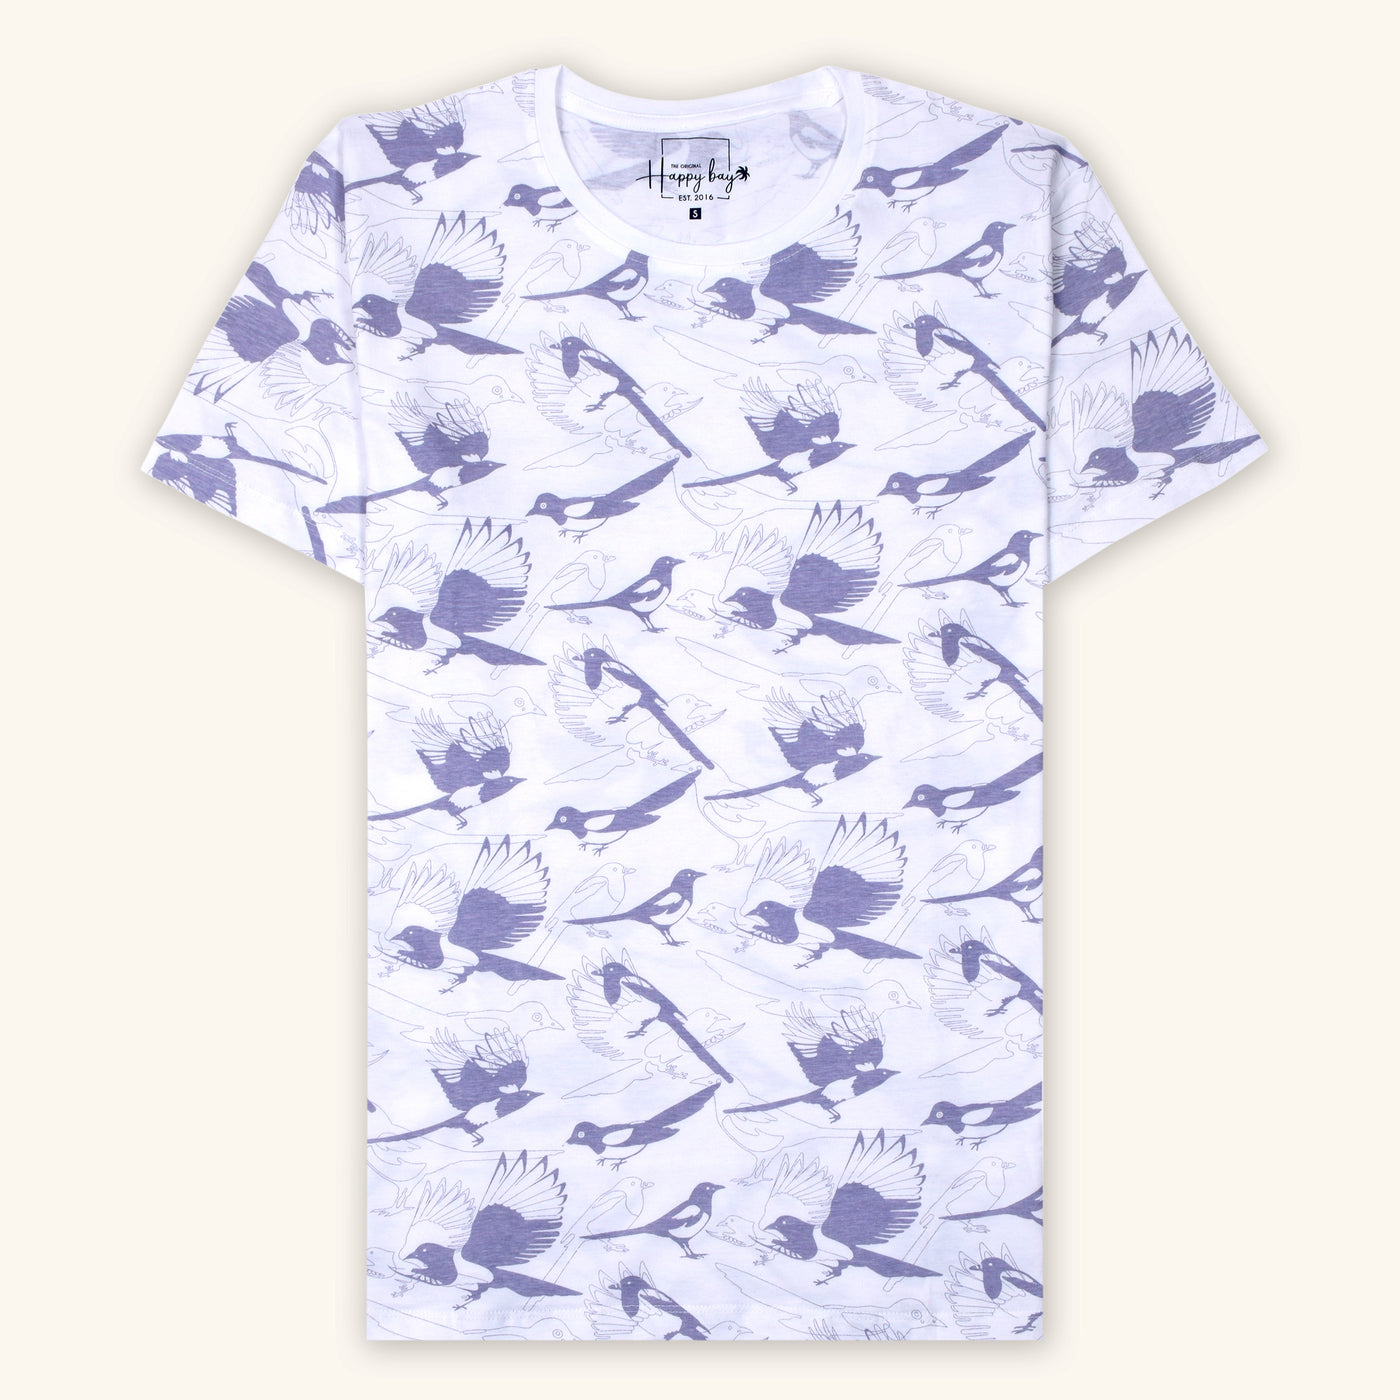 Buy now white forest t-shirt